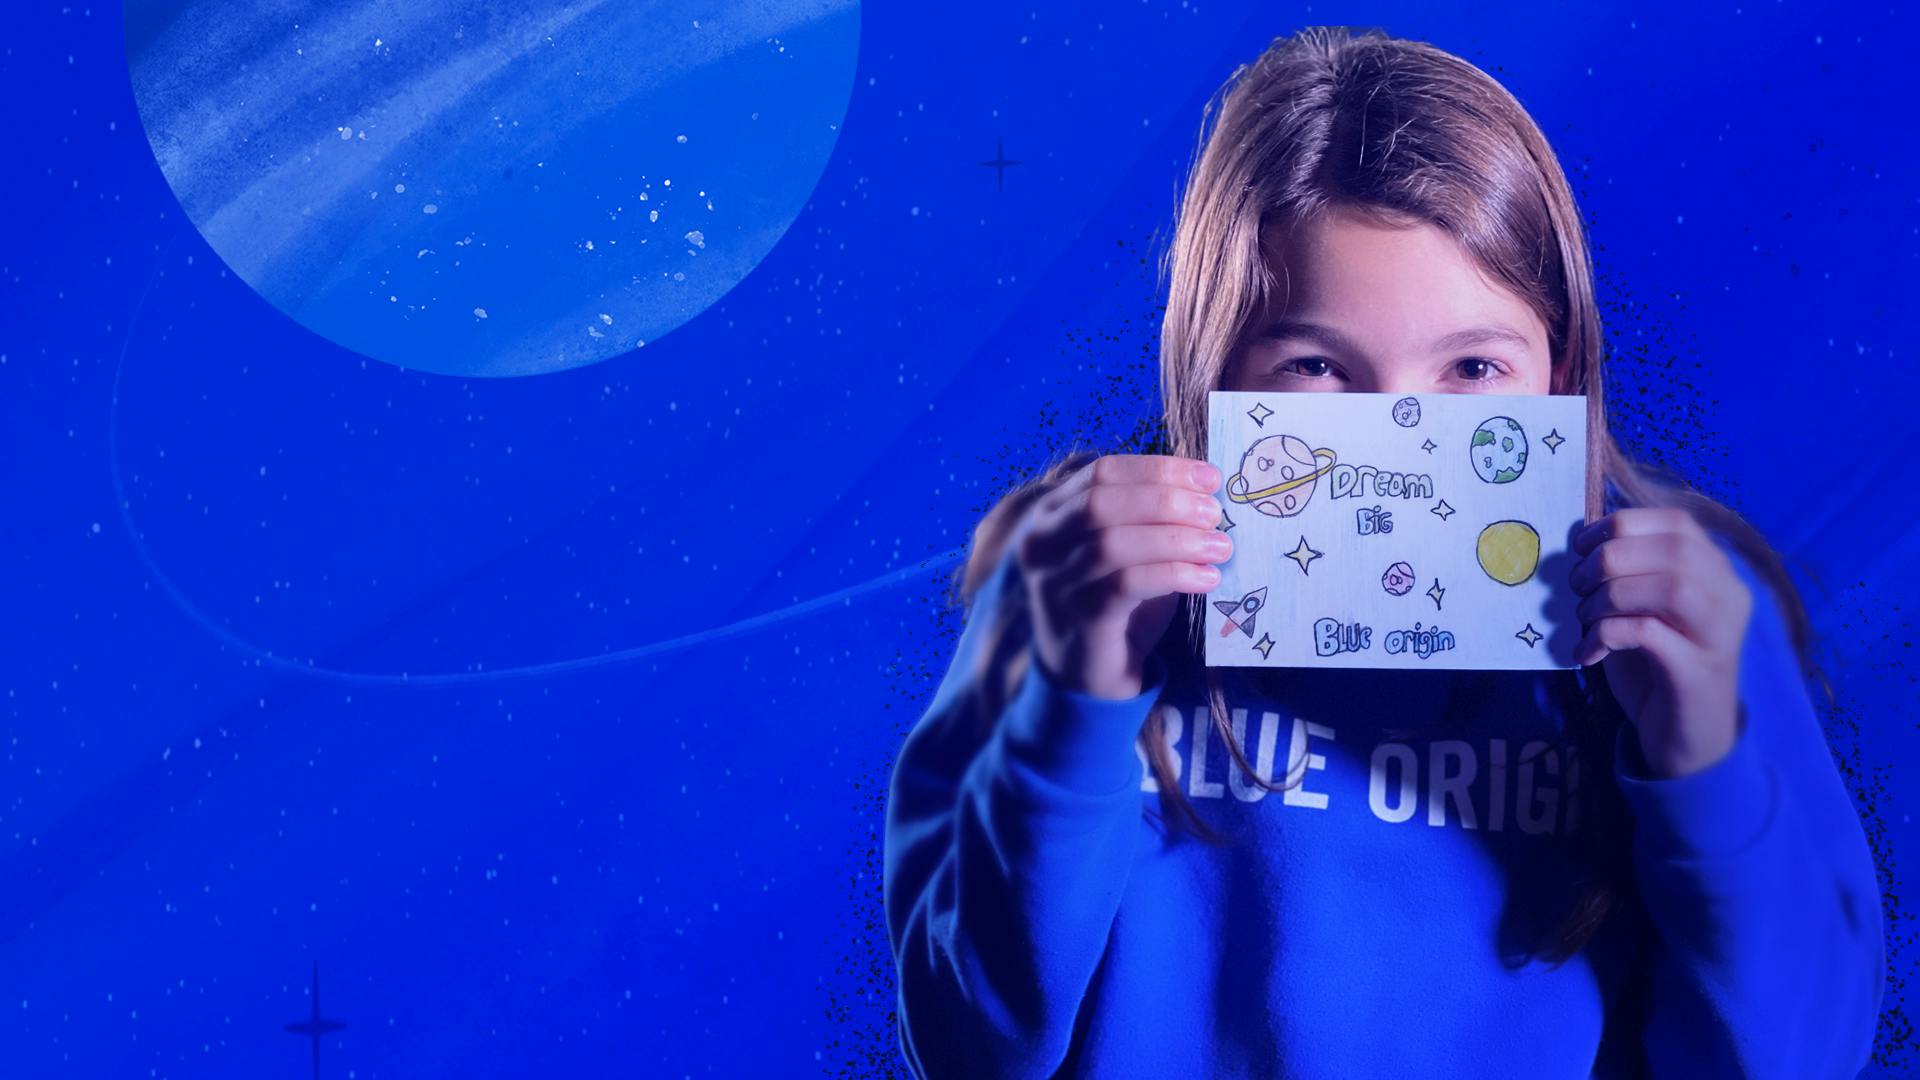 A girl in a 'Blue Origin' sweatshirt holds a paper postcard up to her face